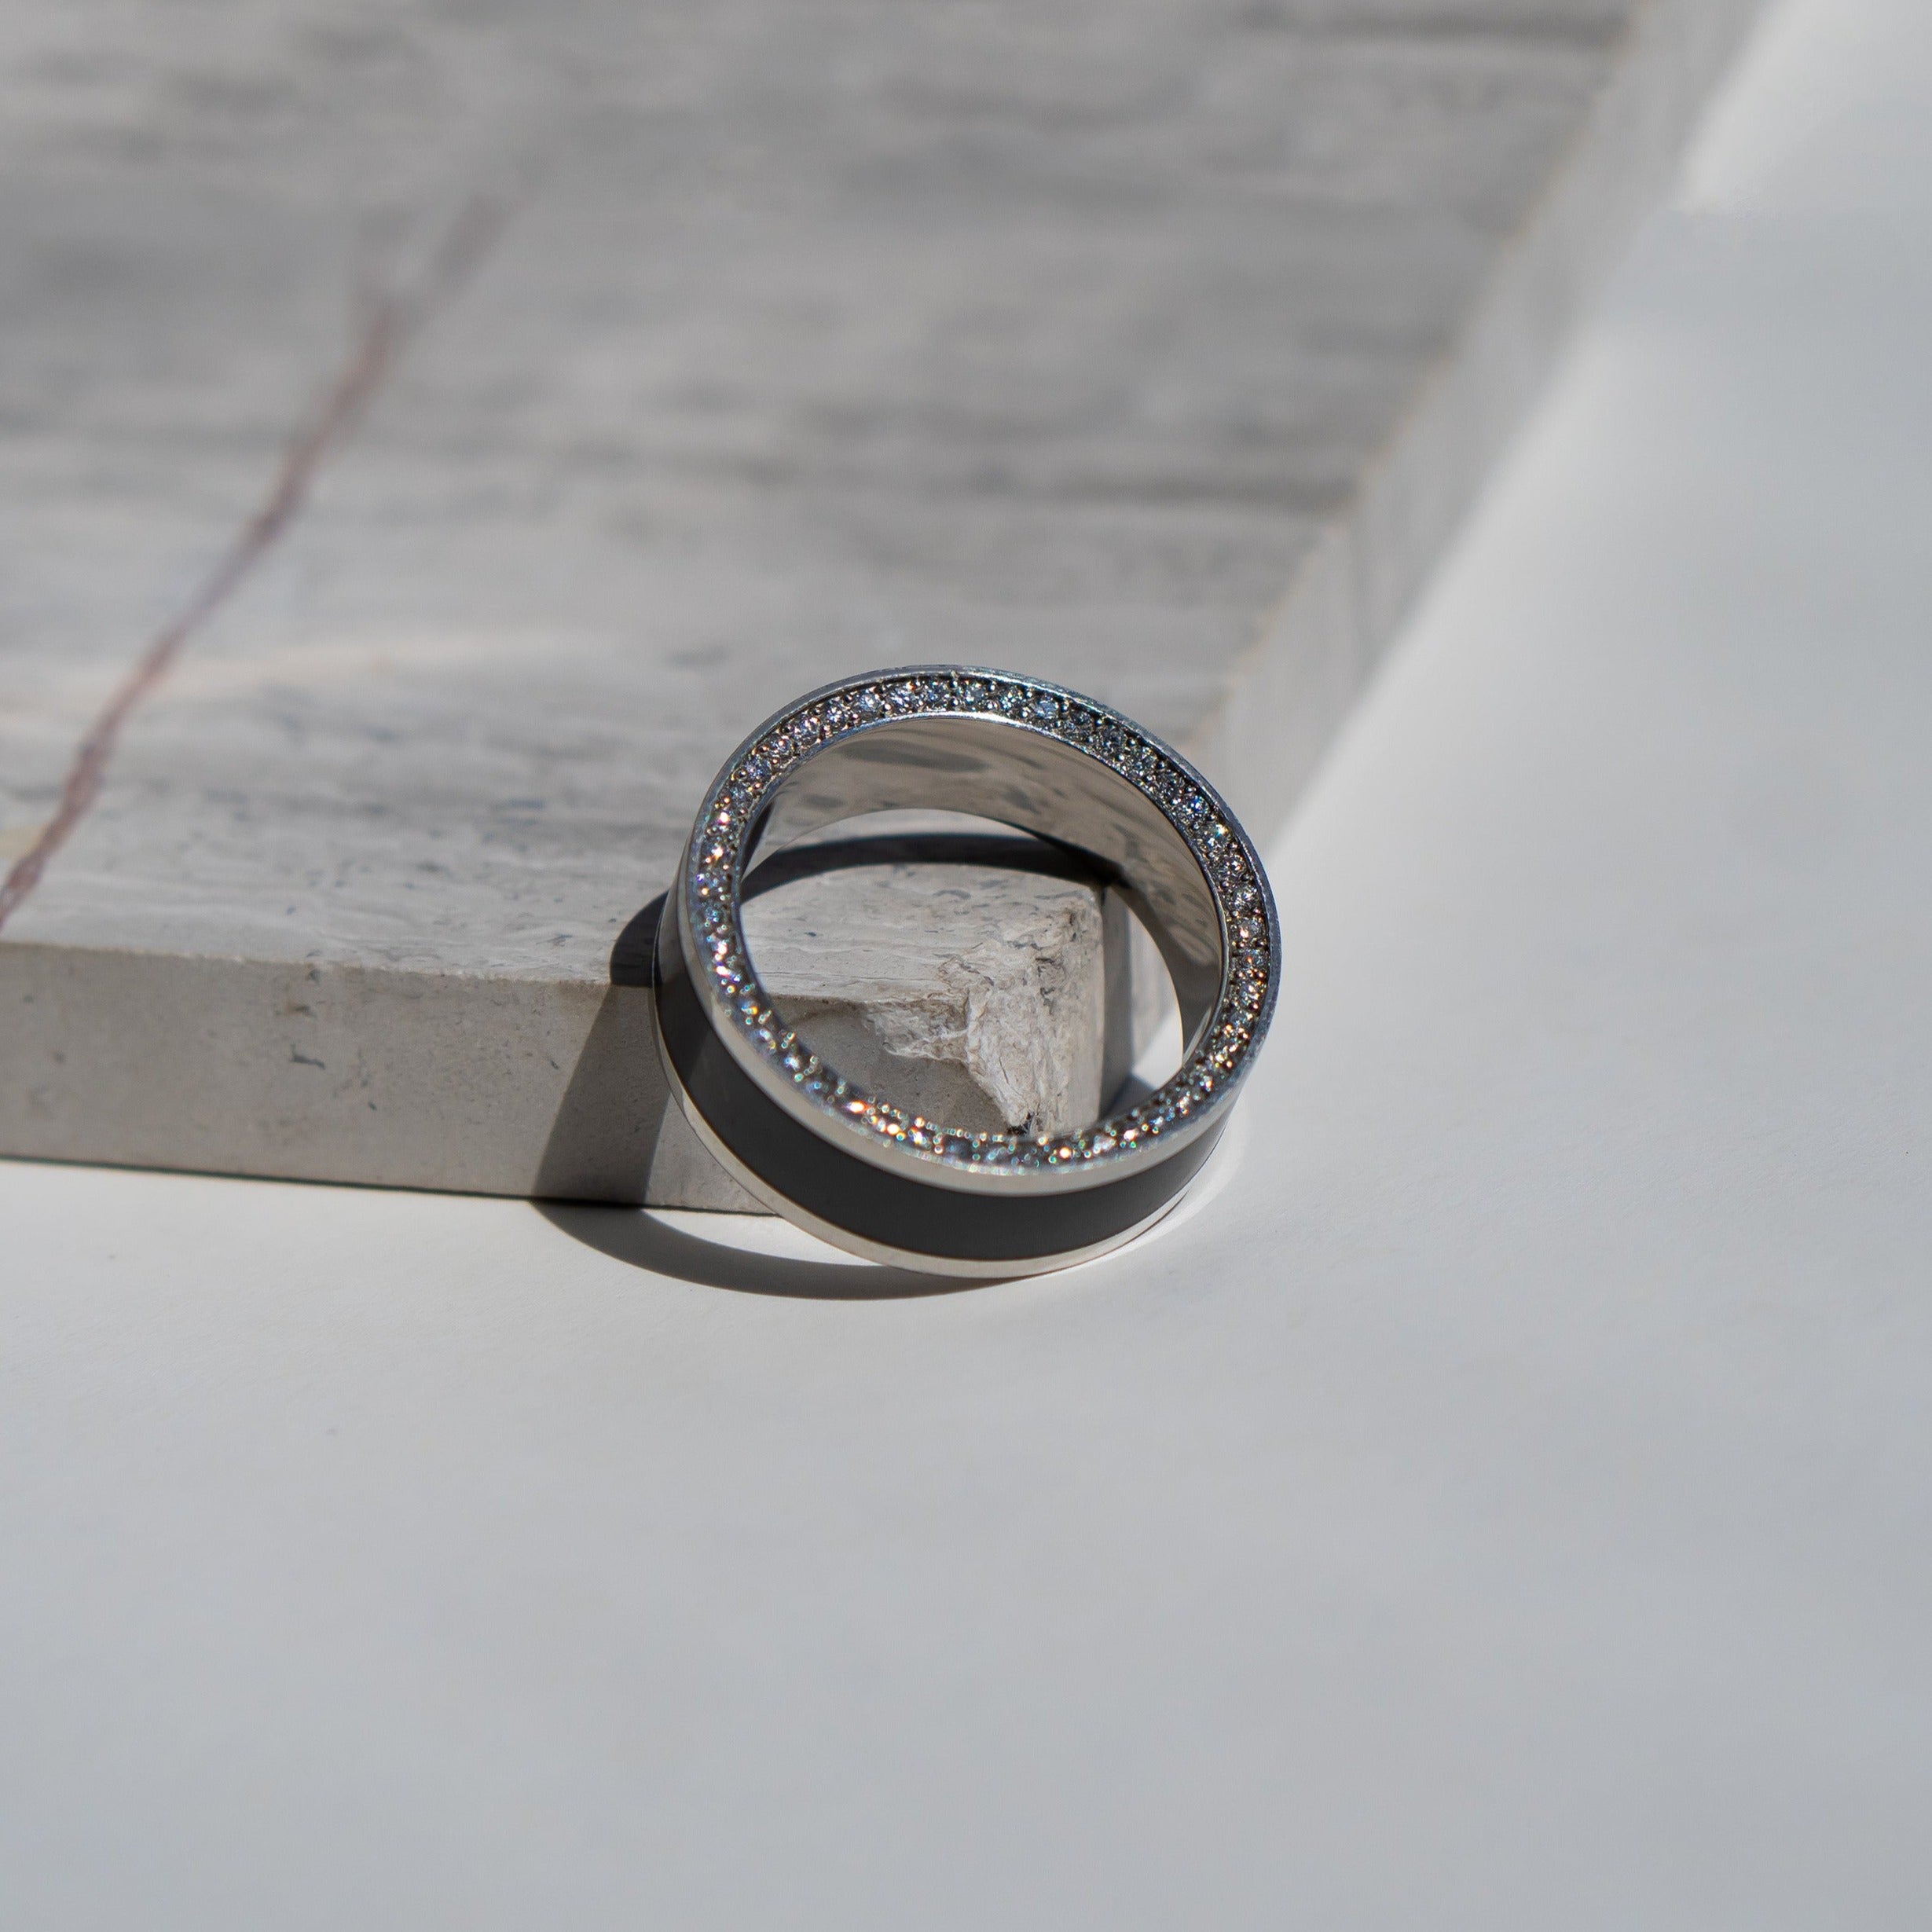 Ring shot #1 of our Elysium Zeus solid black diamond inlay ring with white diamond insets on a marble surface | Men’s Black Diamond Platinum Rings